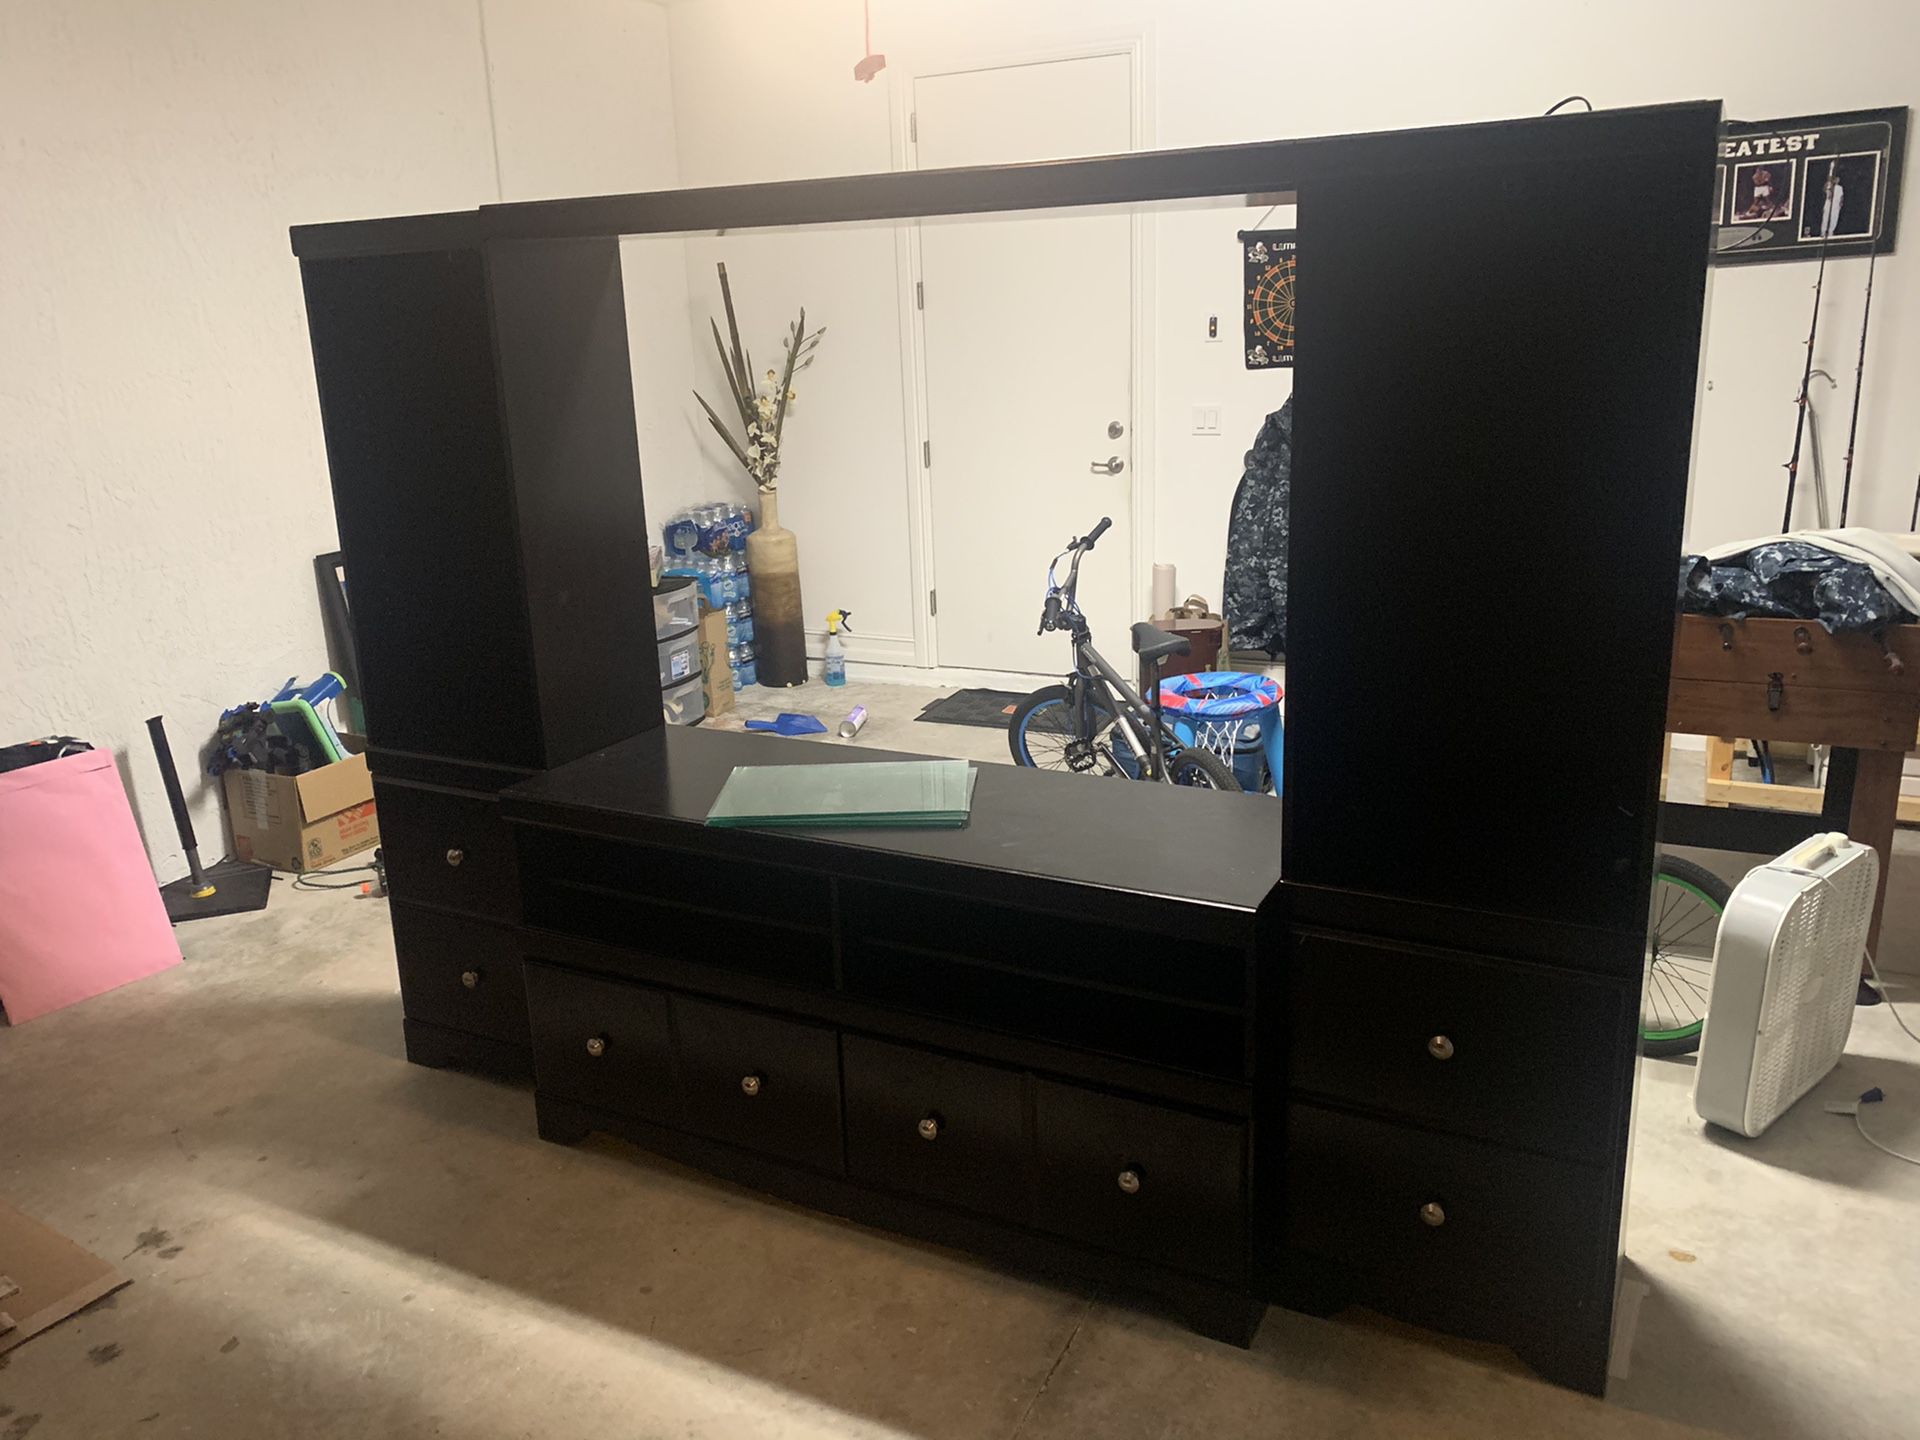 Full 4 piece entertainment center with 4 glass shelves. Both columns have lighting as well. Tons of storage and very clean.